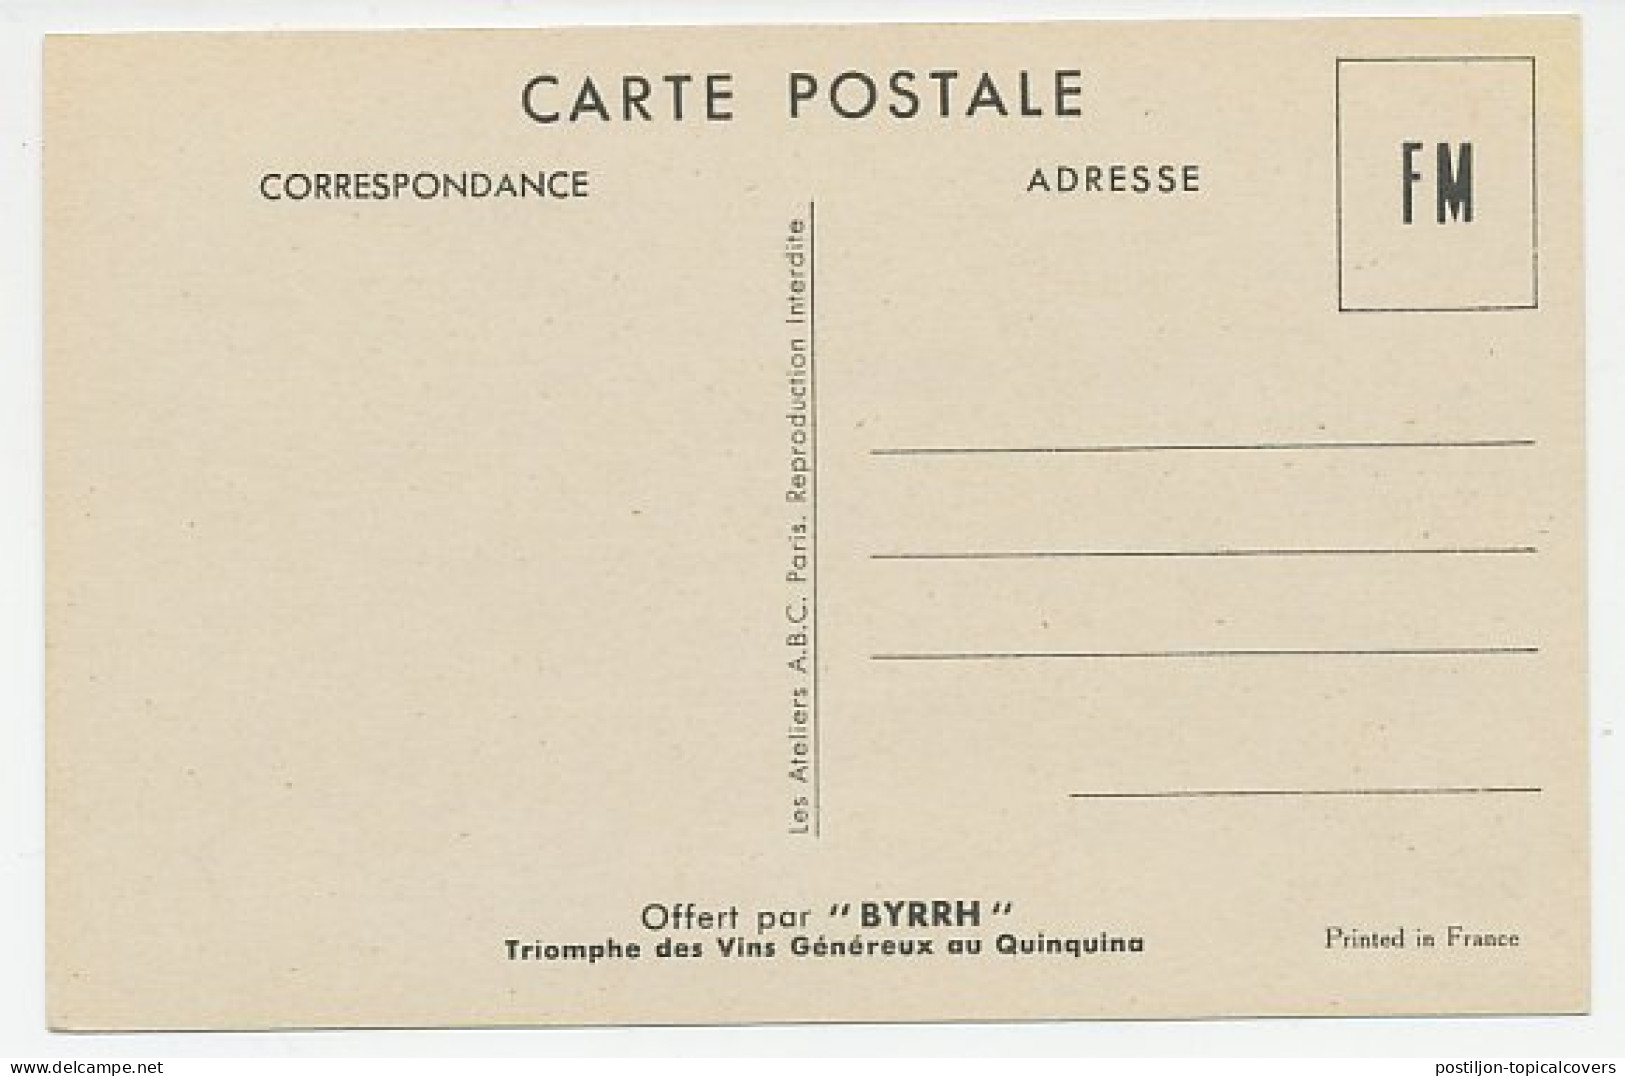 Military Service Card France Soldiers - WWII - WO2